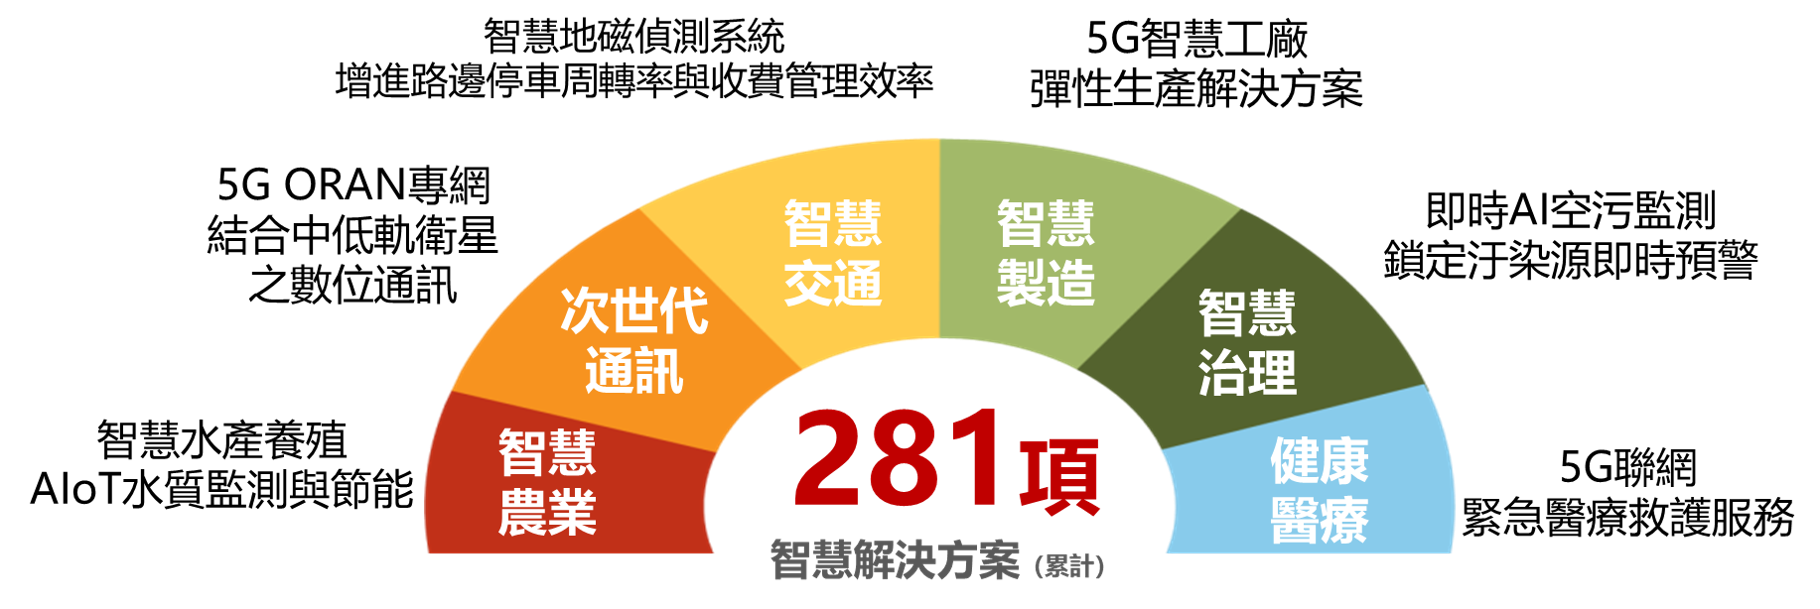 281 smart solutions are domestically quenched and imported into 22 counties and cities across Taiwan to improve the quality of life of the people